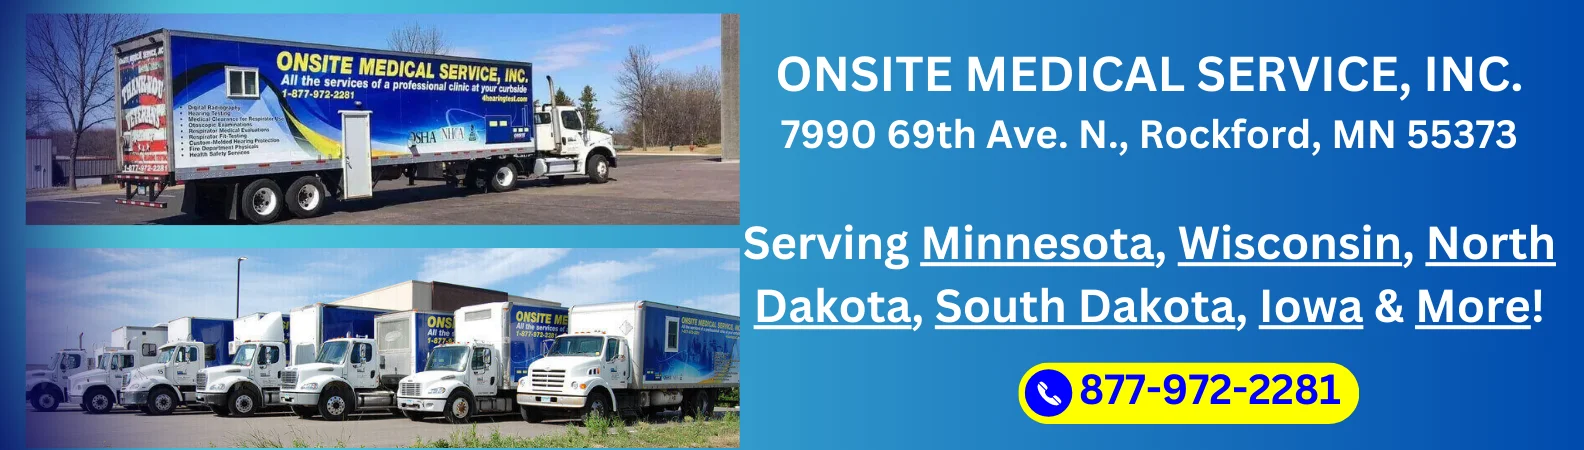 ONSITE Medical Services in MN